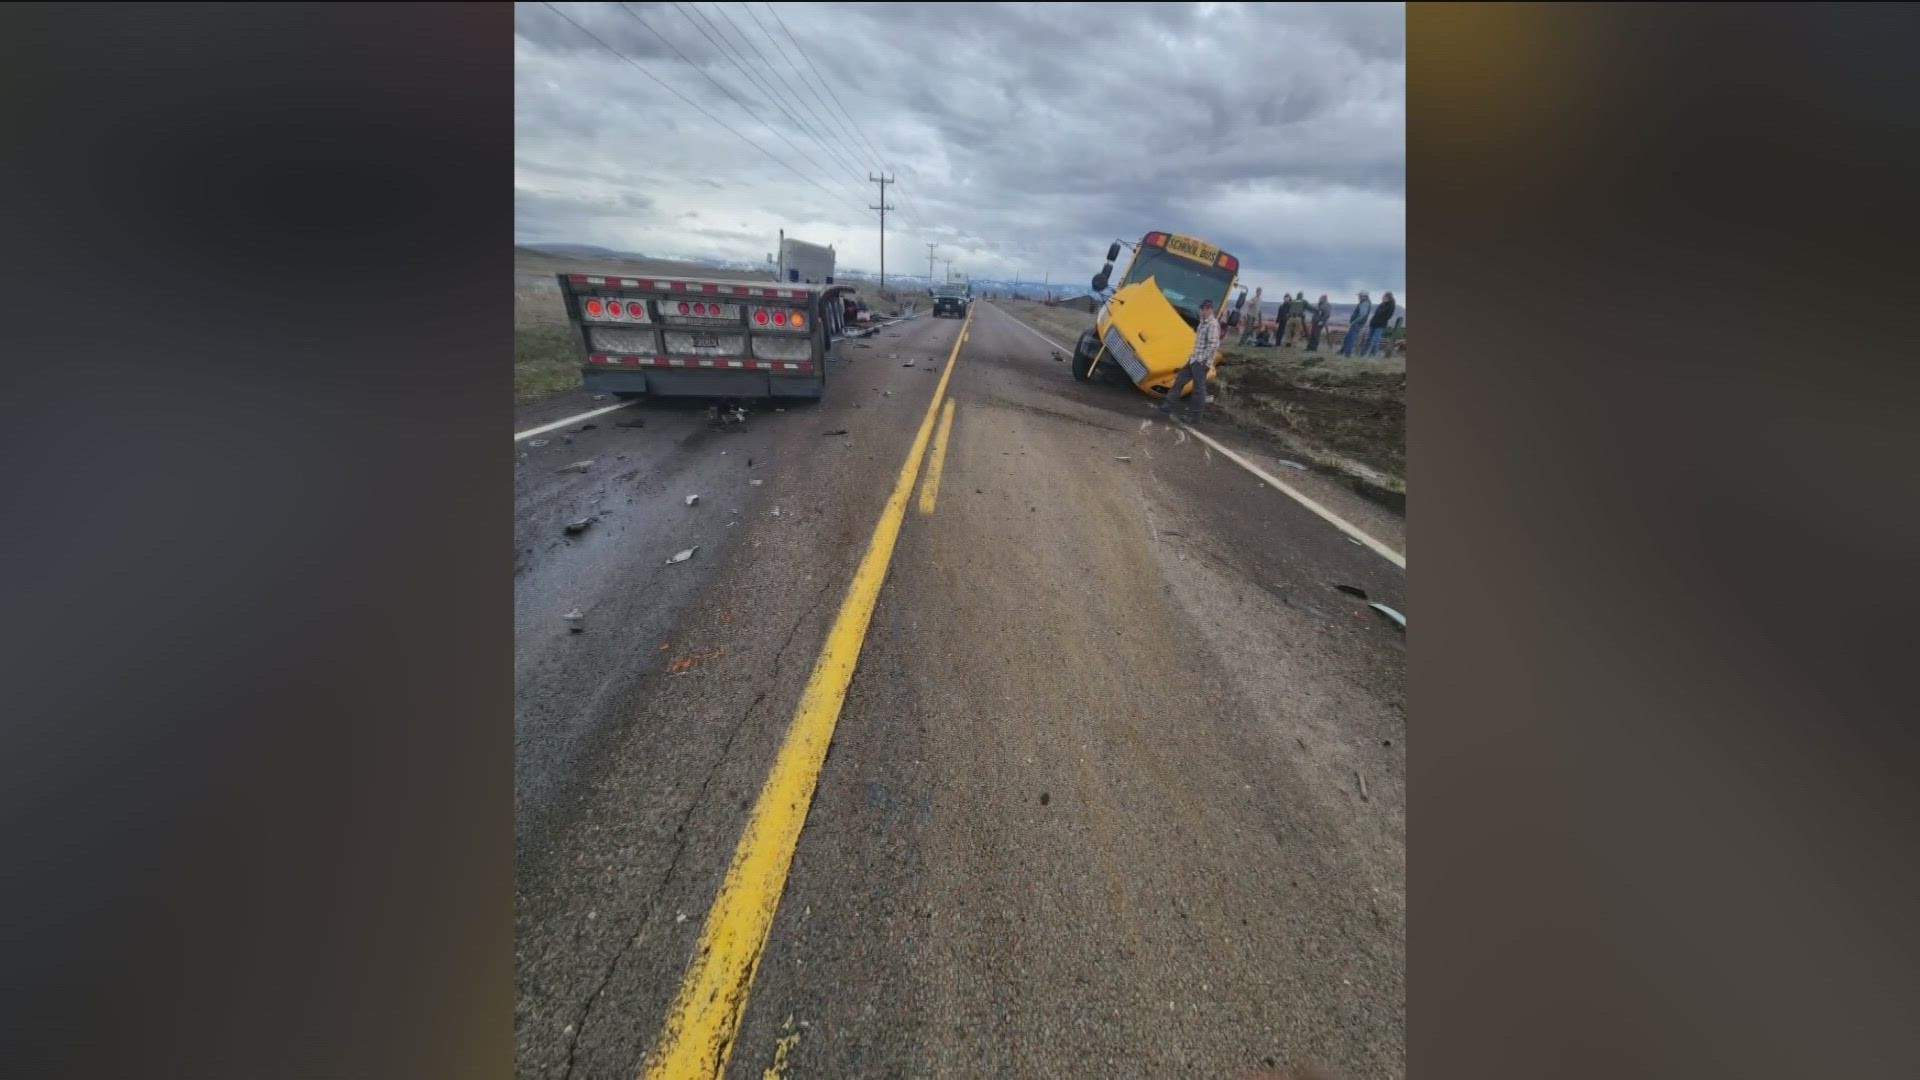 The bus made a stop for unloading, and it was then that the bus was struck by a 2024 Peterbilt semi-truck.